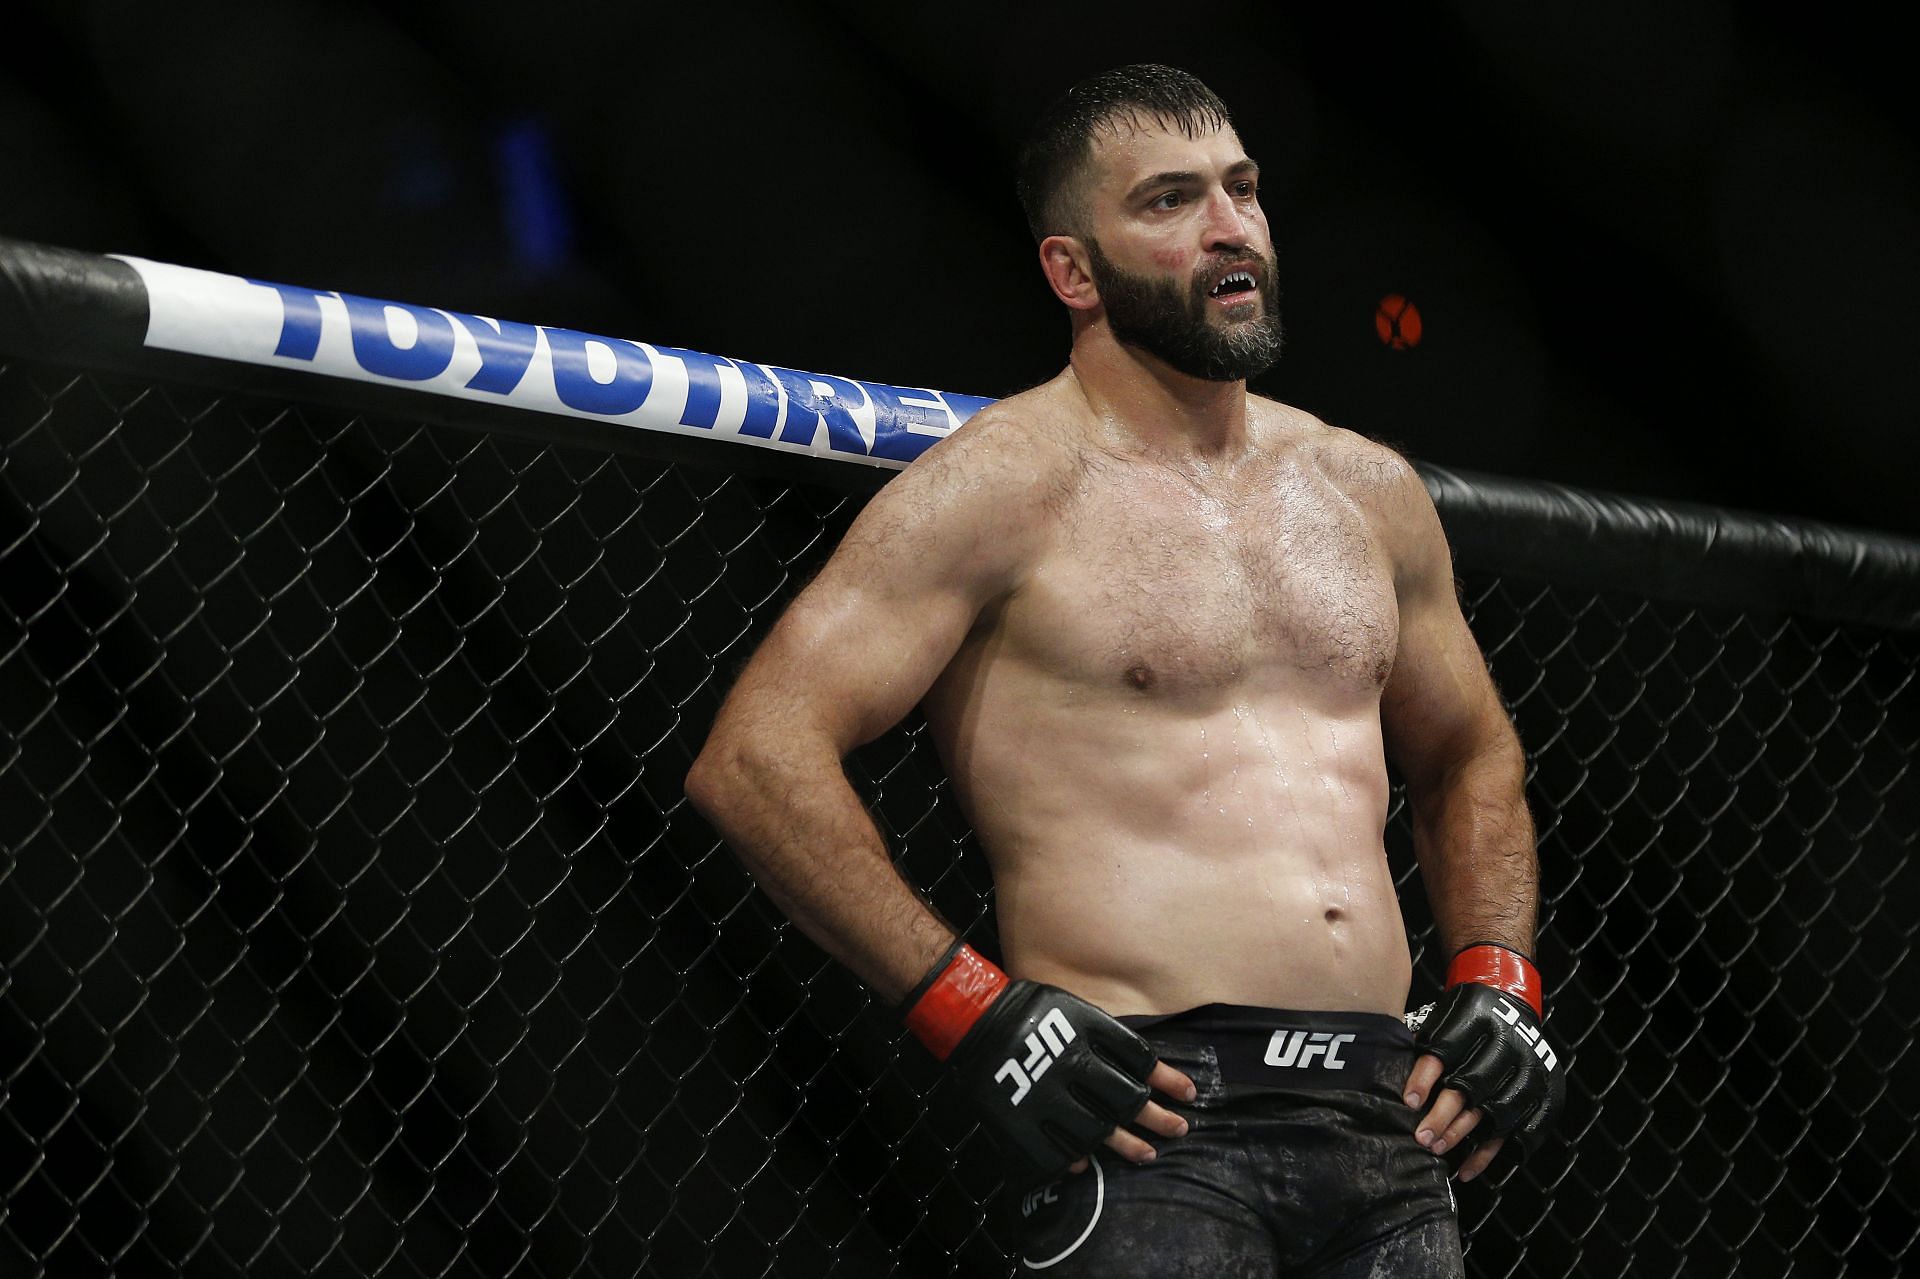 Andrei Arlovski has been competing in the octagon for over 20 years